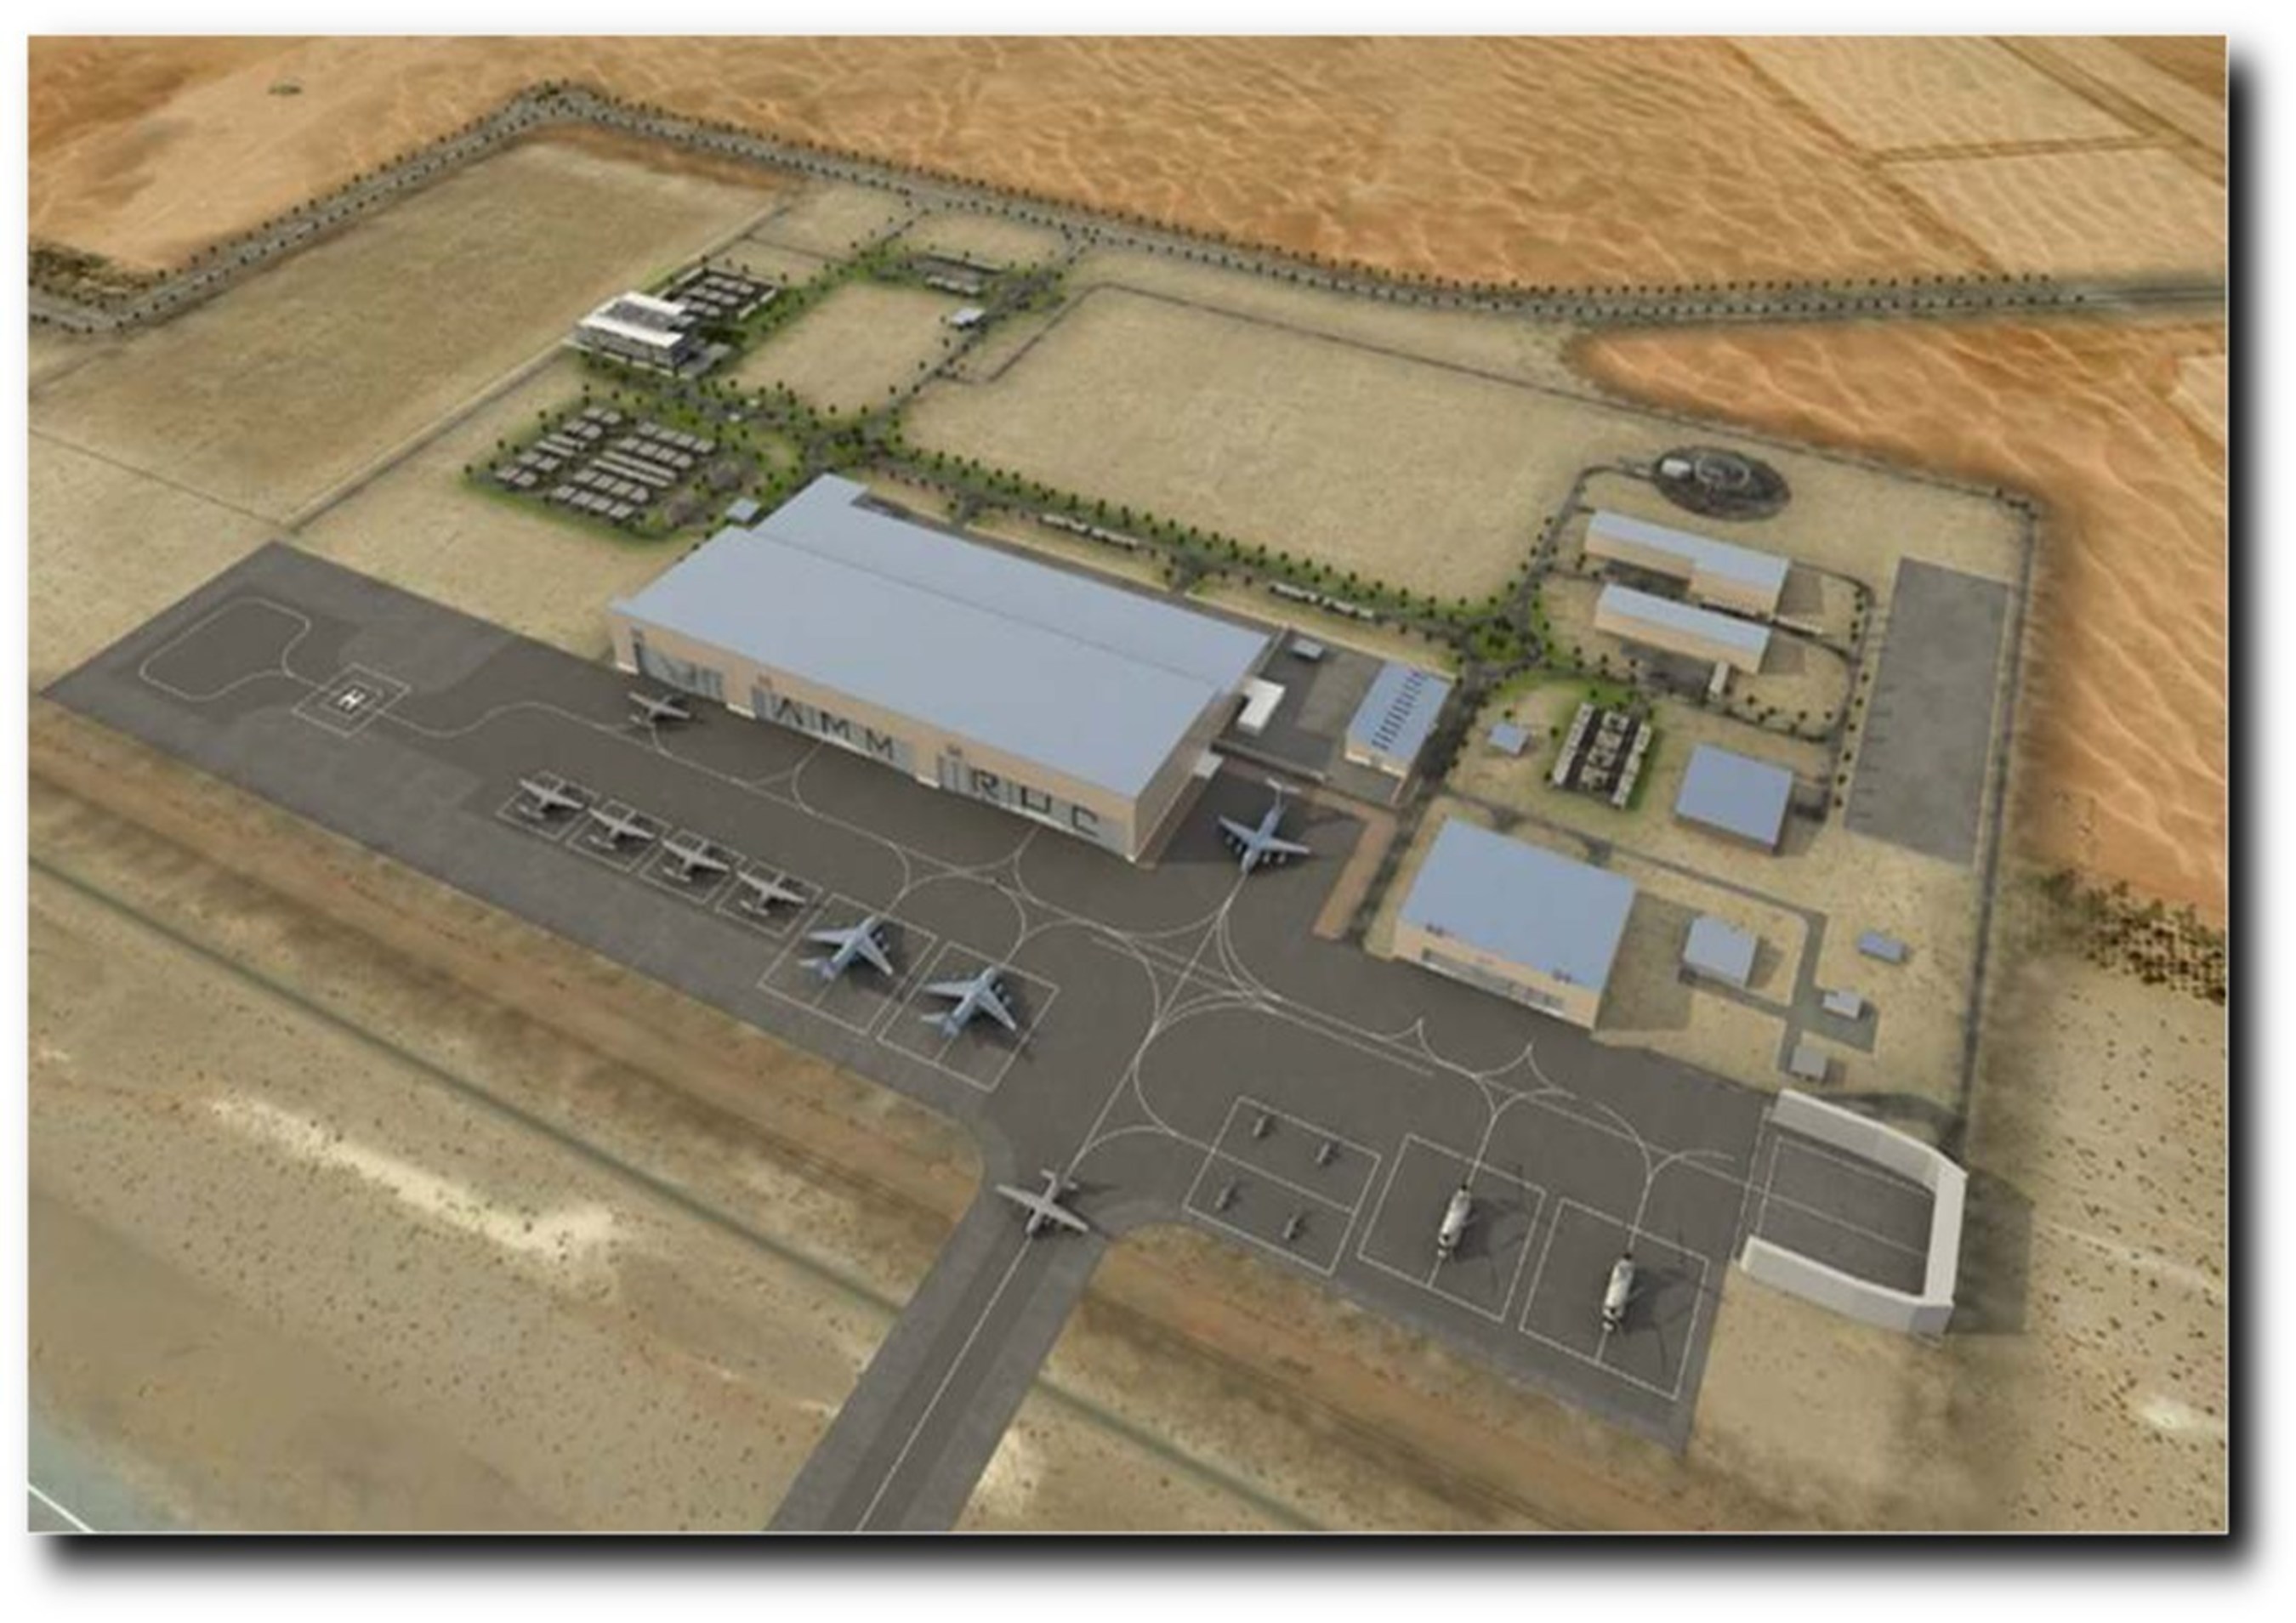 A rendering of the state-of-the-art AMMROC (Advanced Military Maintenance Repair and Overhaul Center) facility, which will be the anchor tenant at Nibras Al Ain Aerospace Park, the free-zone project being jointly developed by Mubadala and Abu Dhabi Airports Company to support the establishment of a sustainable aerospace hub in Abu Dhabi. AAR (NYSE: AIR) has been selected by AMMROC to support the design, outfitting and integration of key areas of the facility. Once completed, it will be one of the largest dedicated military MROs in the world.